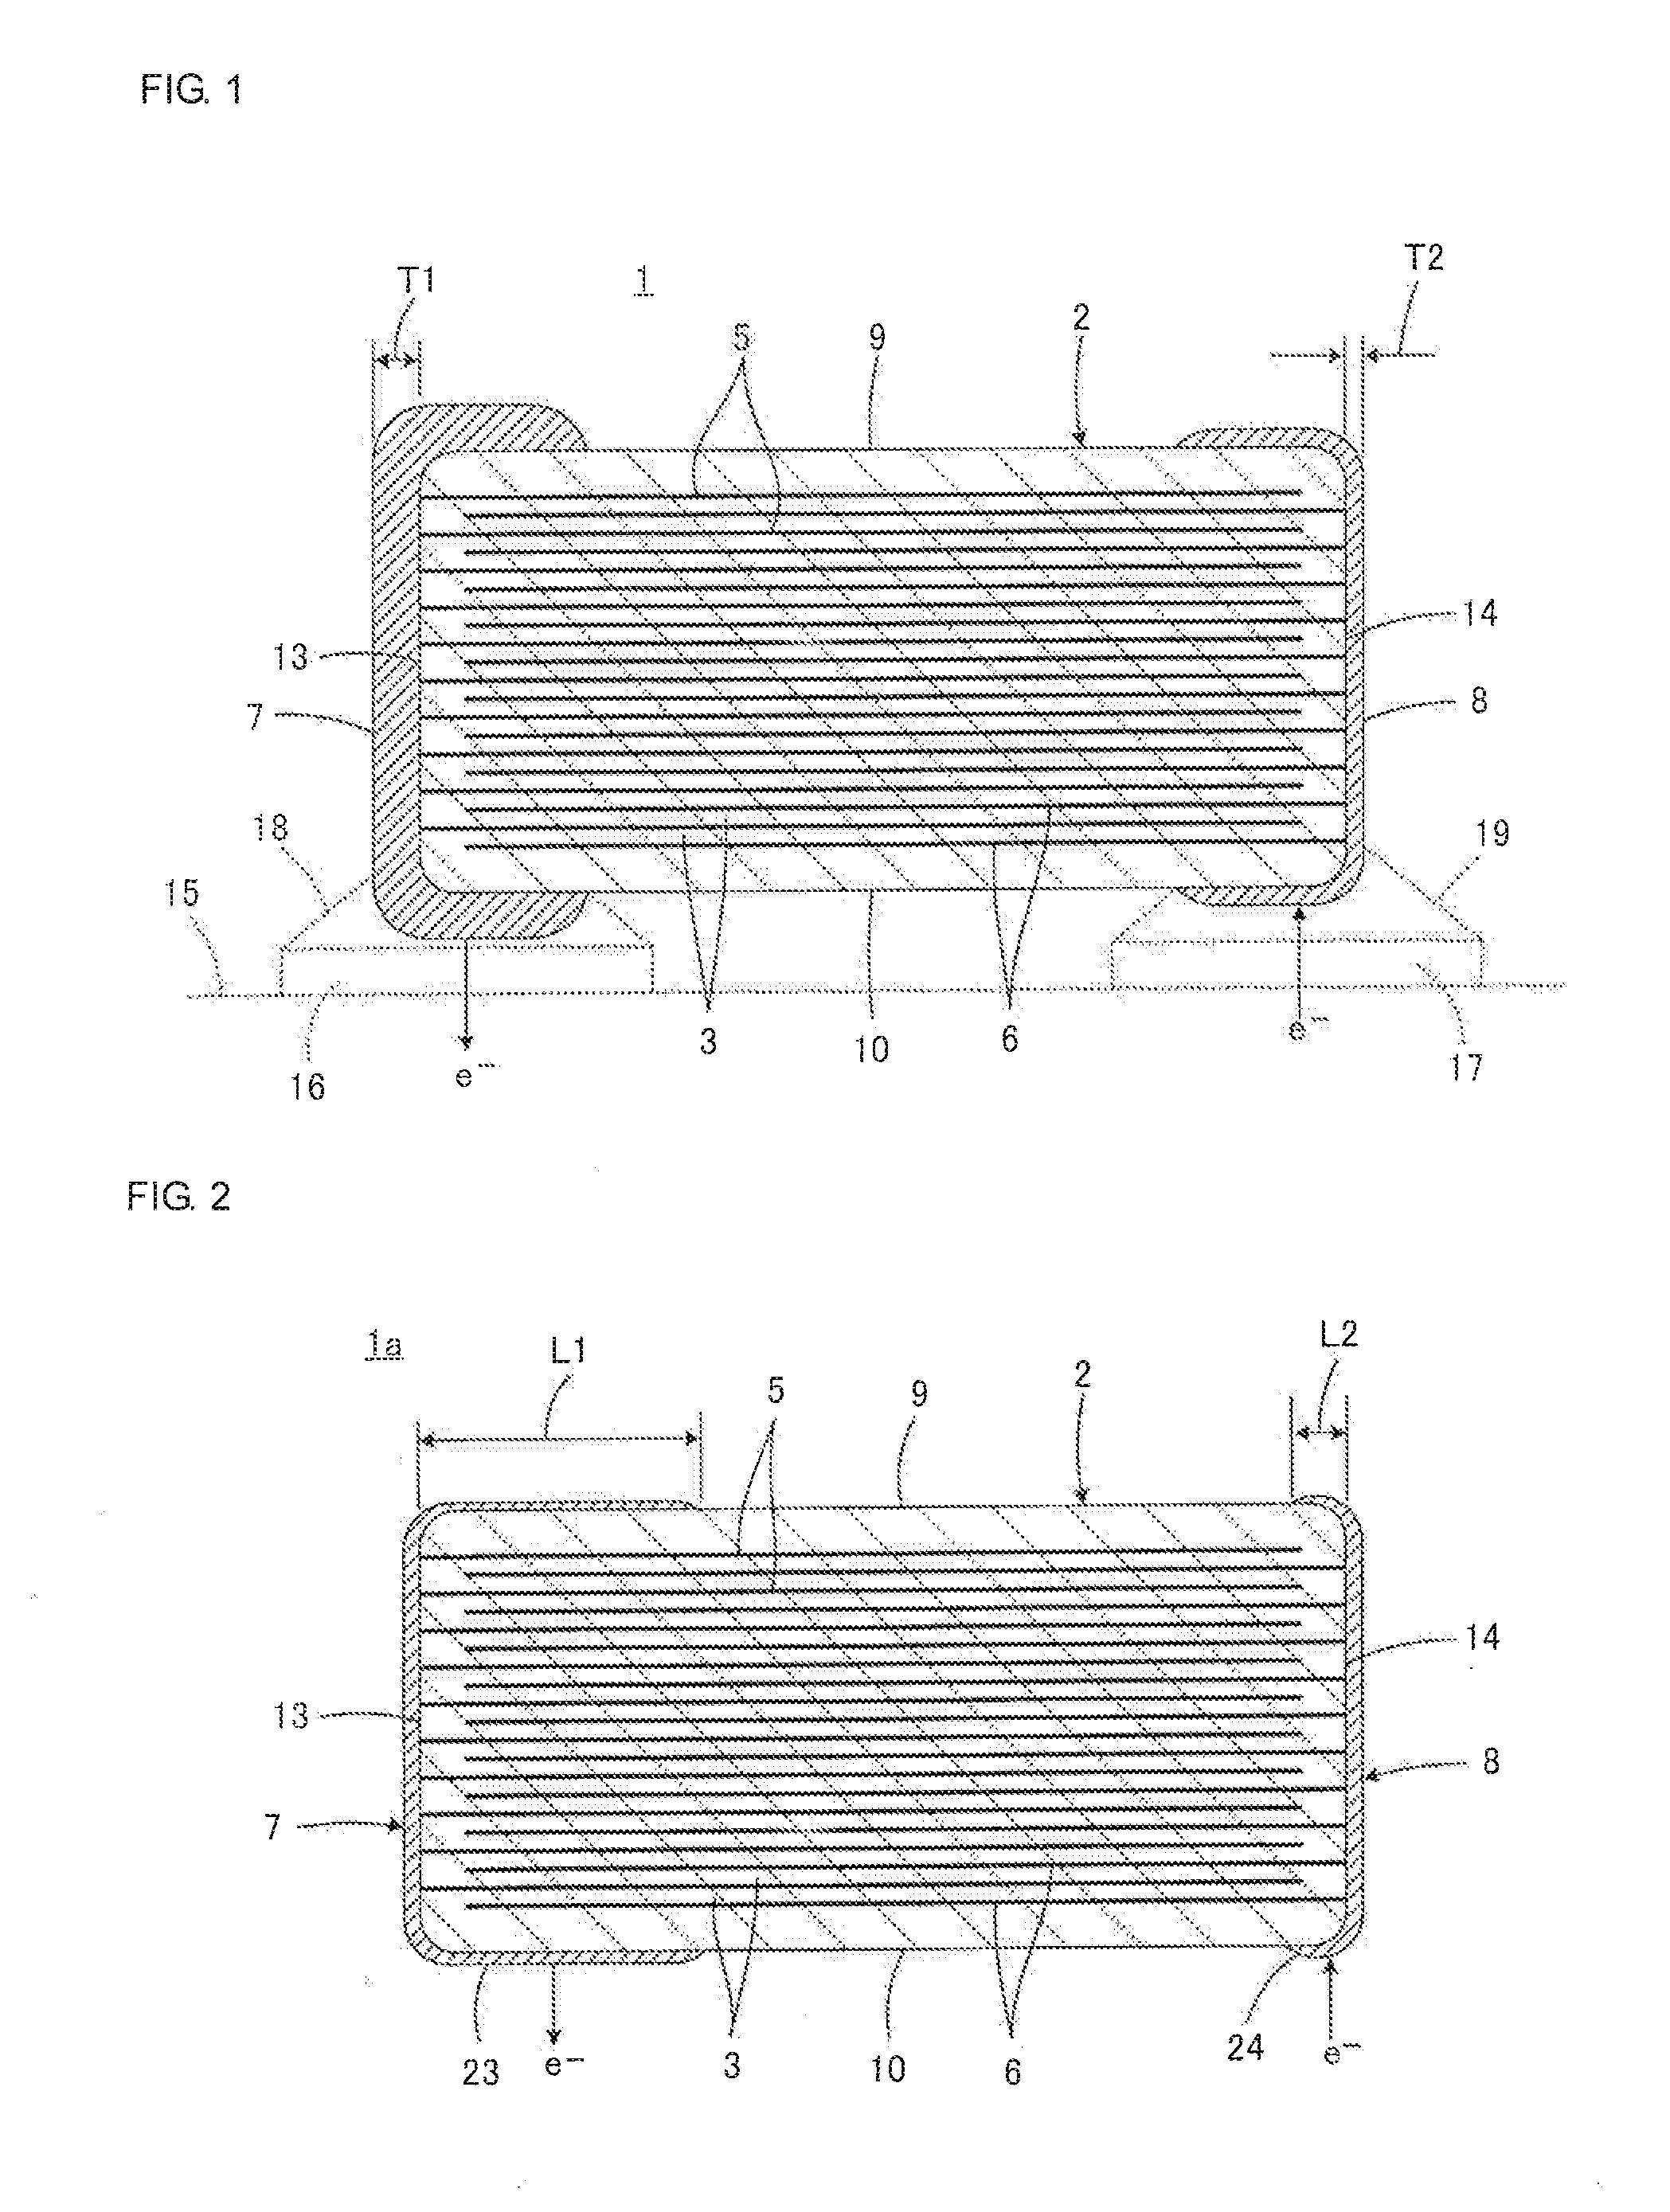 Monolithic ceramic capacitor and structure for mounting the same